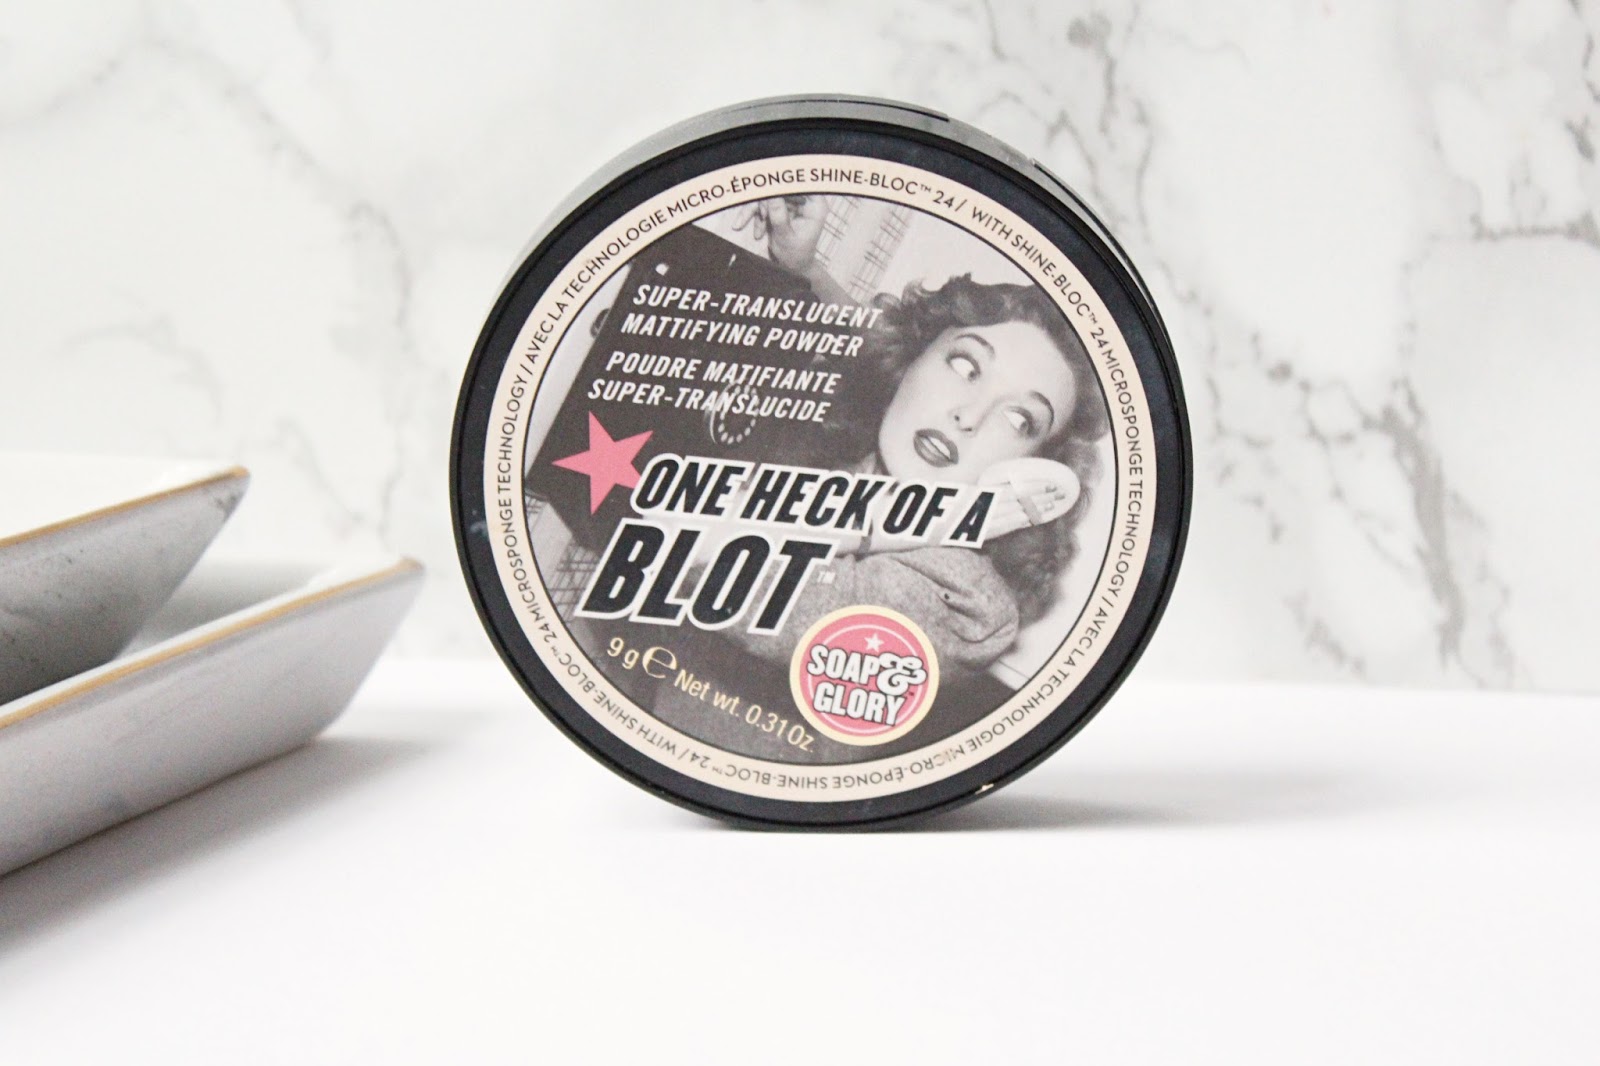 Soap & Glory One Heck of a Blot Powder Review 